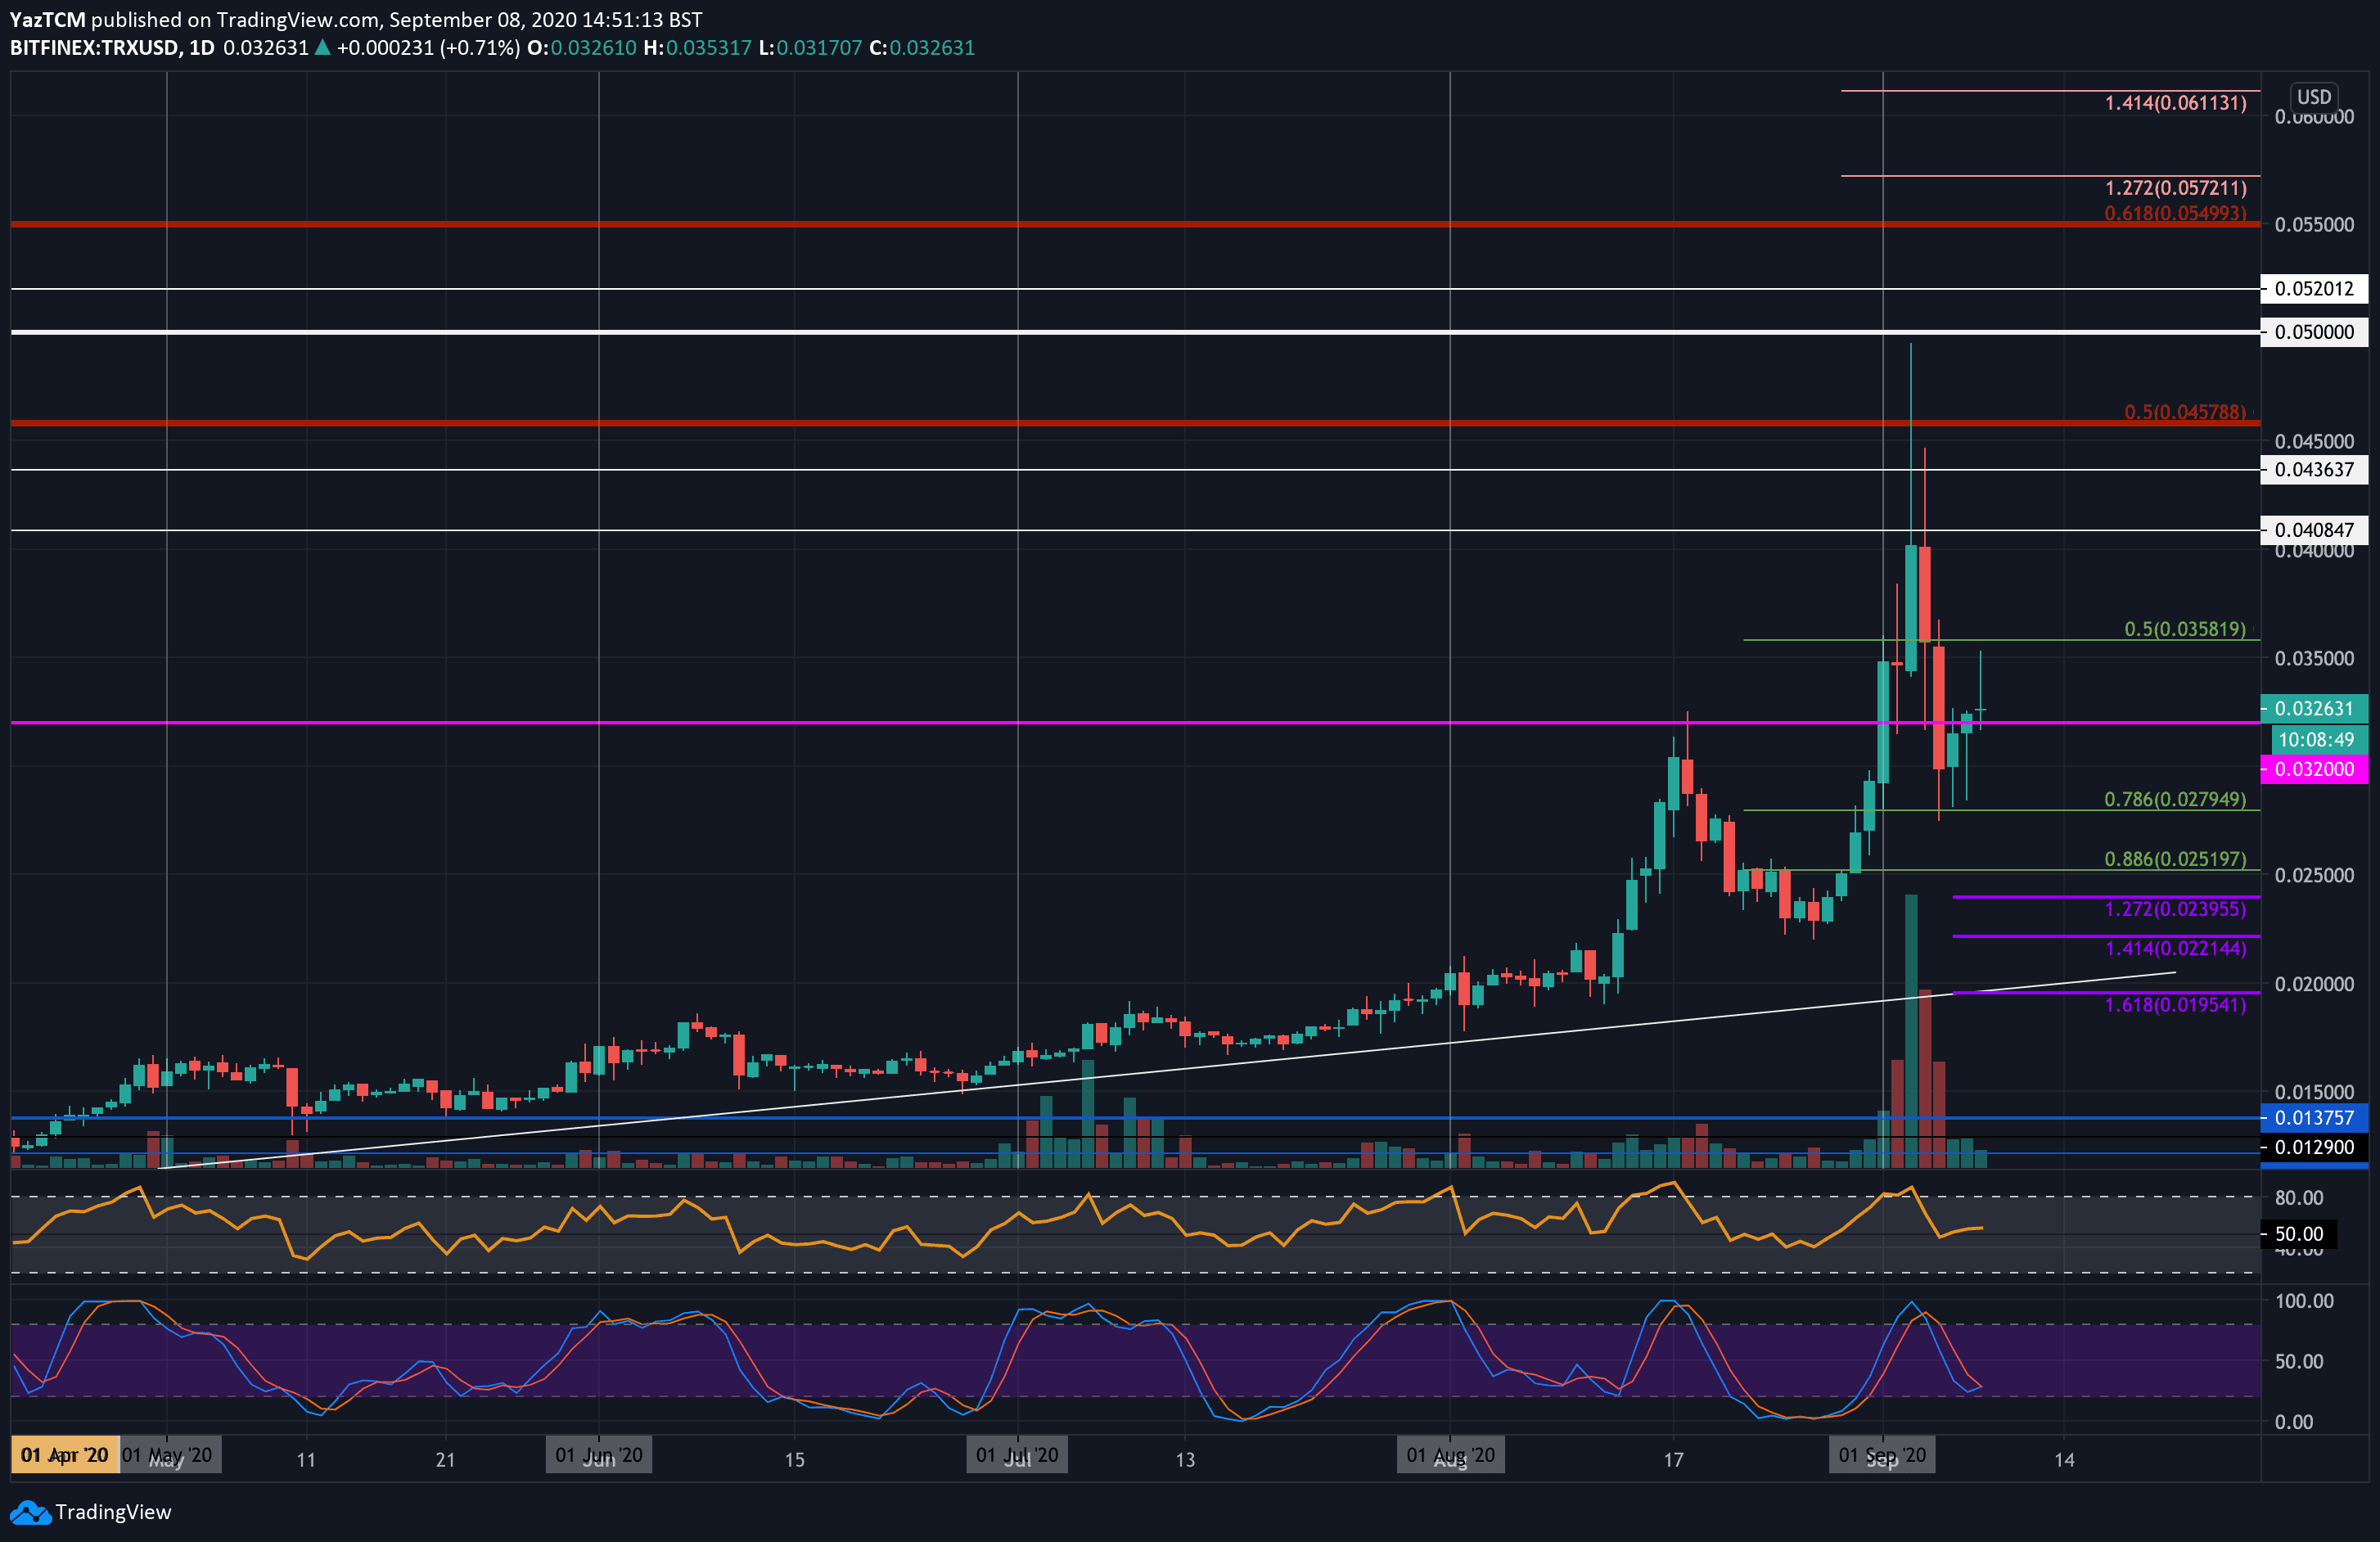 Trx-gains-12%-amid-an-overall-struggling-market-(tron-price-analysis)